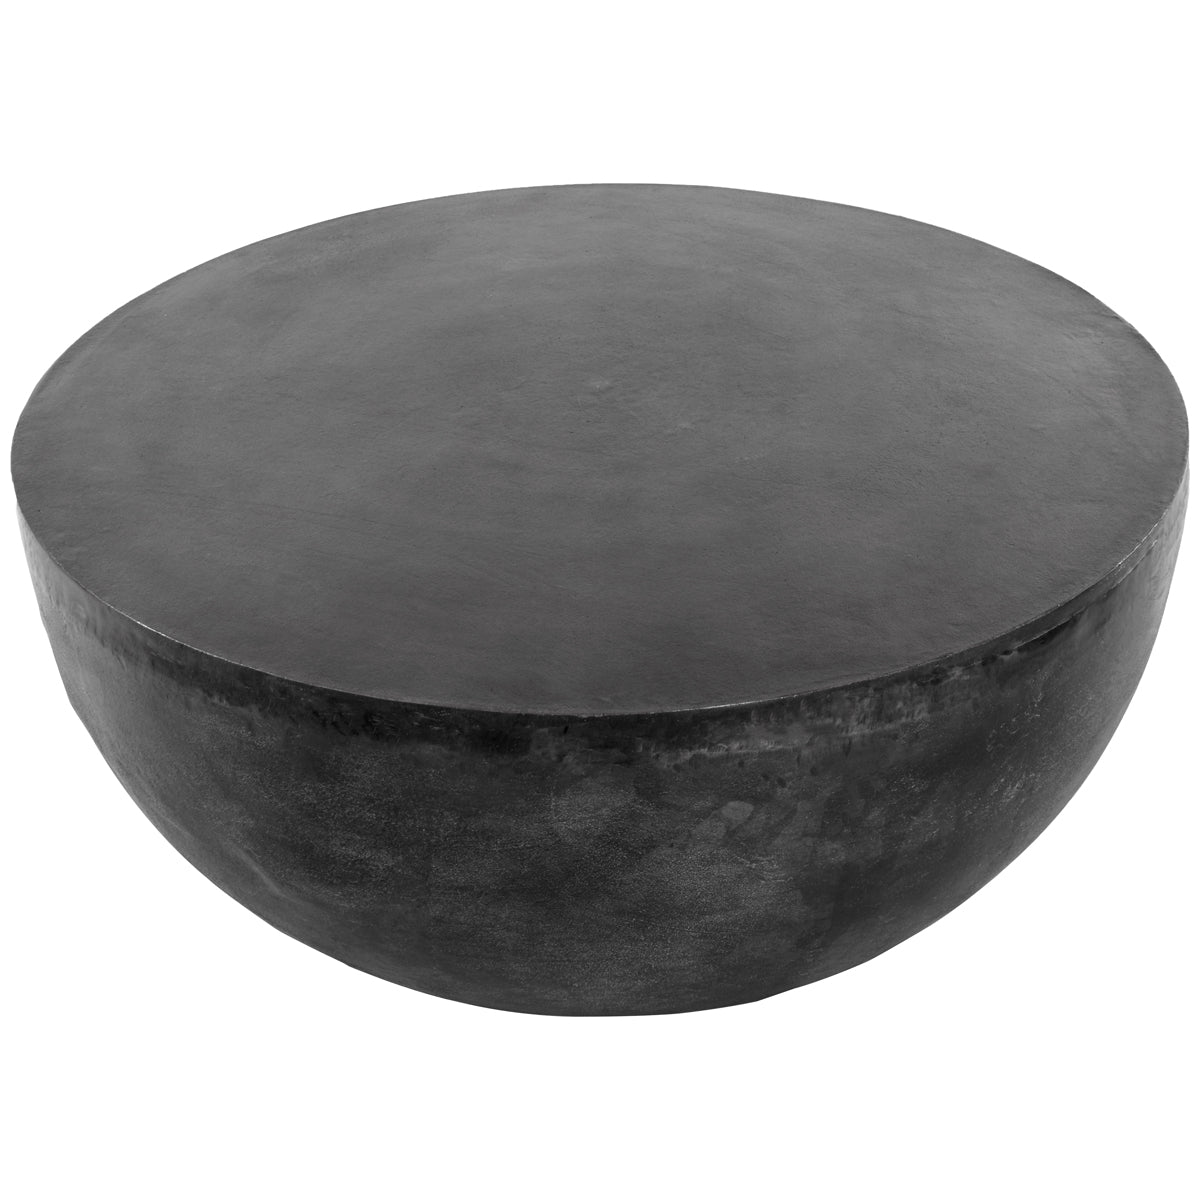 Four Hands Marlow Basil Round Outdoor Coffee Table